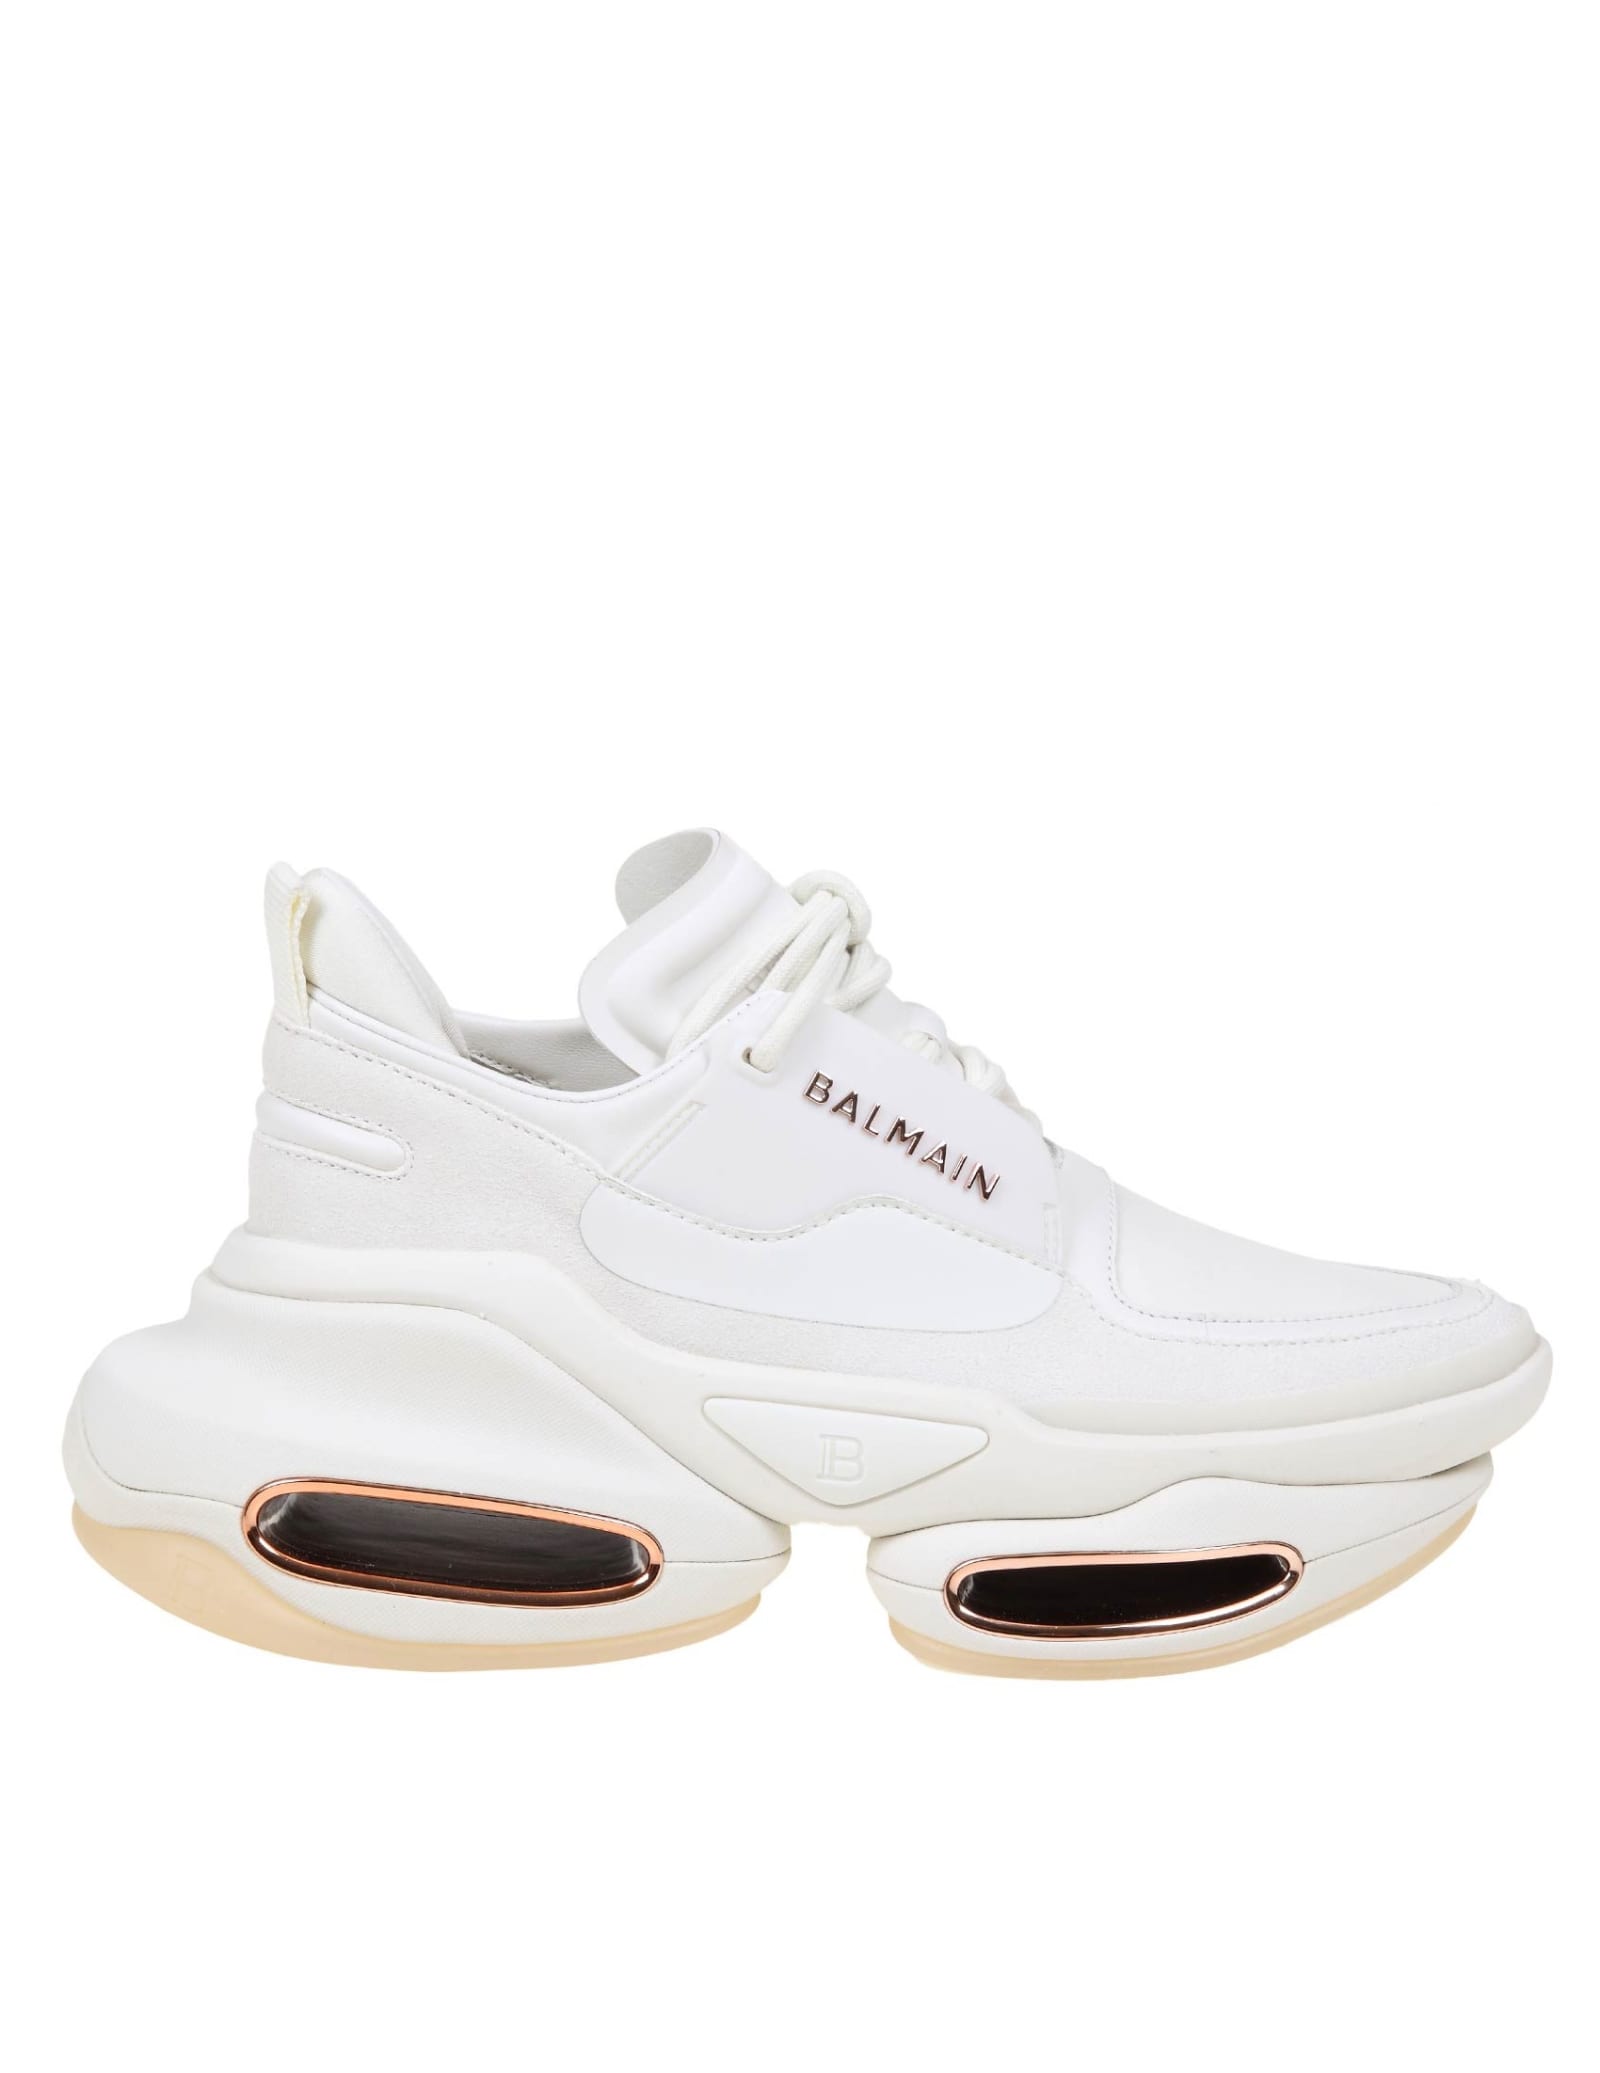 Balmain B-bold Sneakers In Leather And Suede Color White